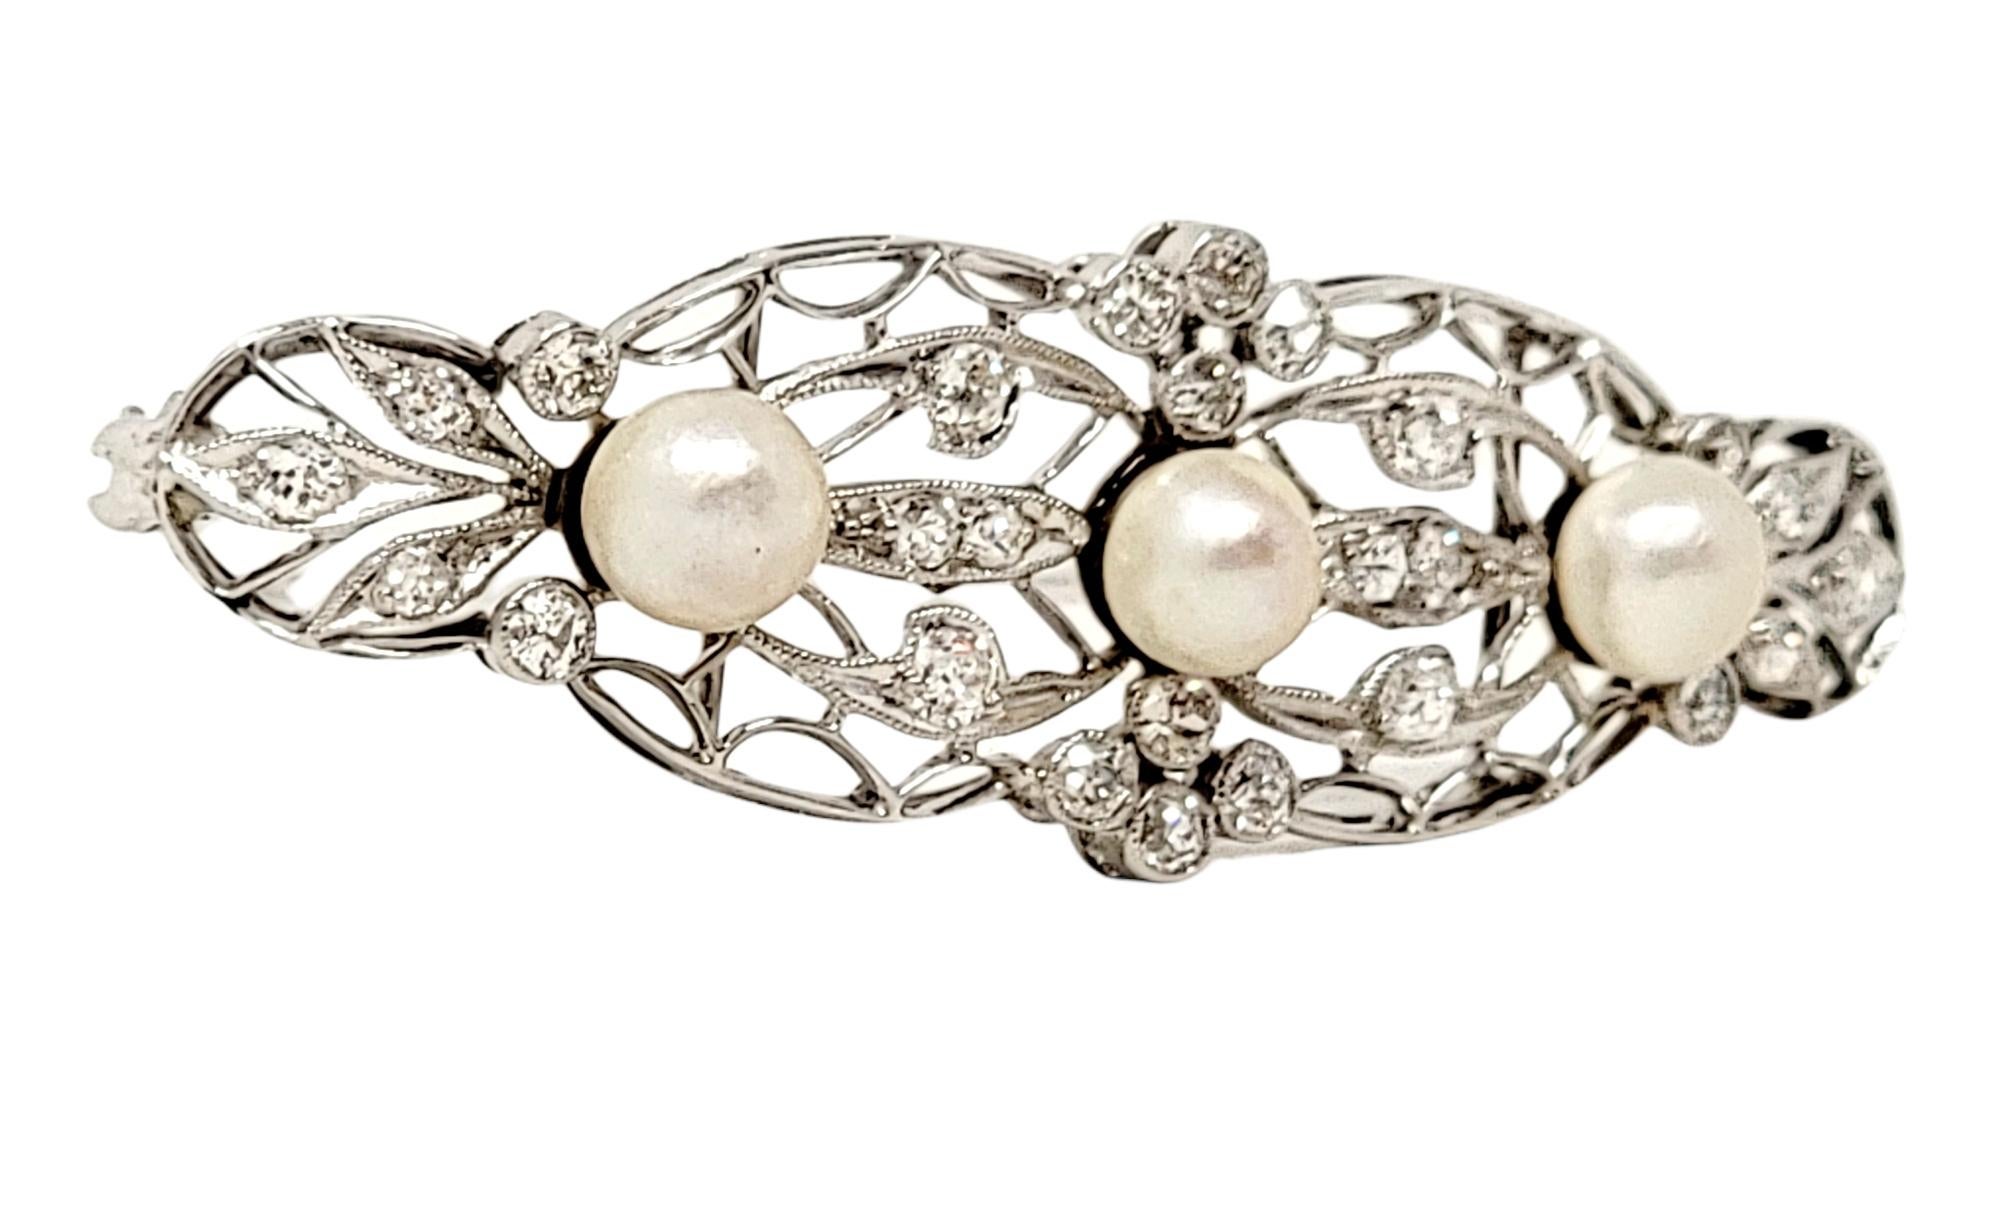 Vintage Edwardian Style Diamond and Pearl Filigree Brooch 14 Karat White Gold In Good Condition For Sale In Scottsdale, AZ